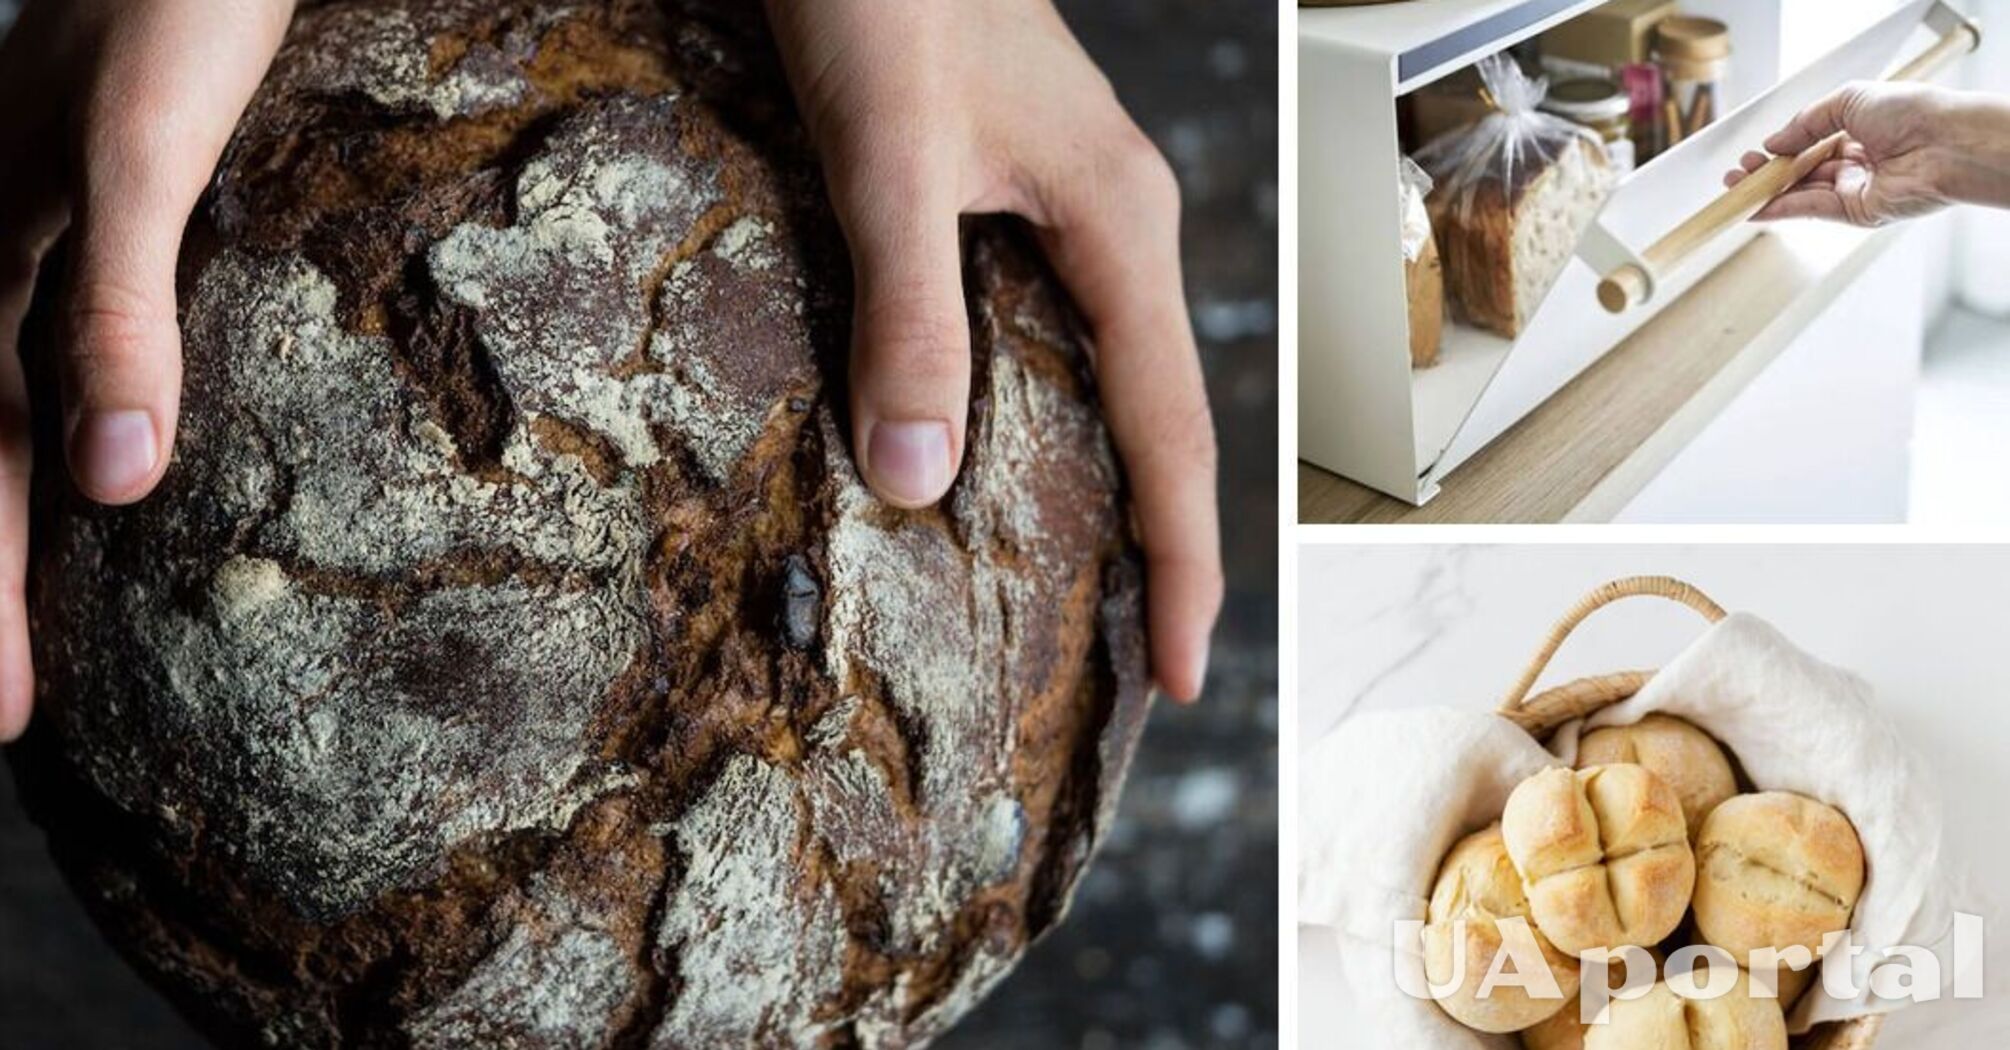 Best ways to keep bread fresher longer: potatoes and salt can help